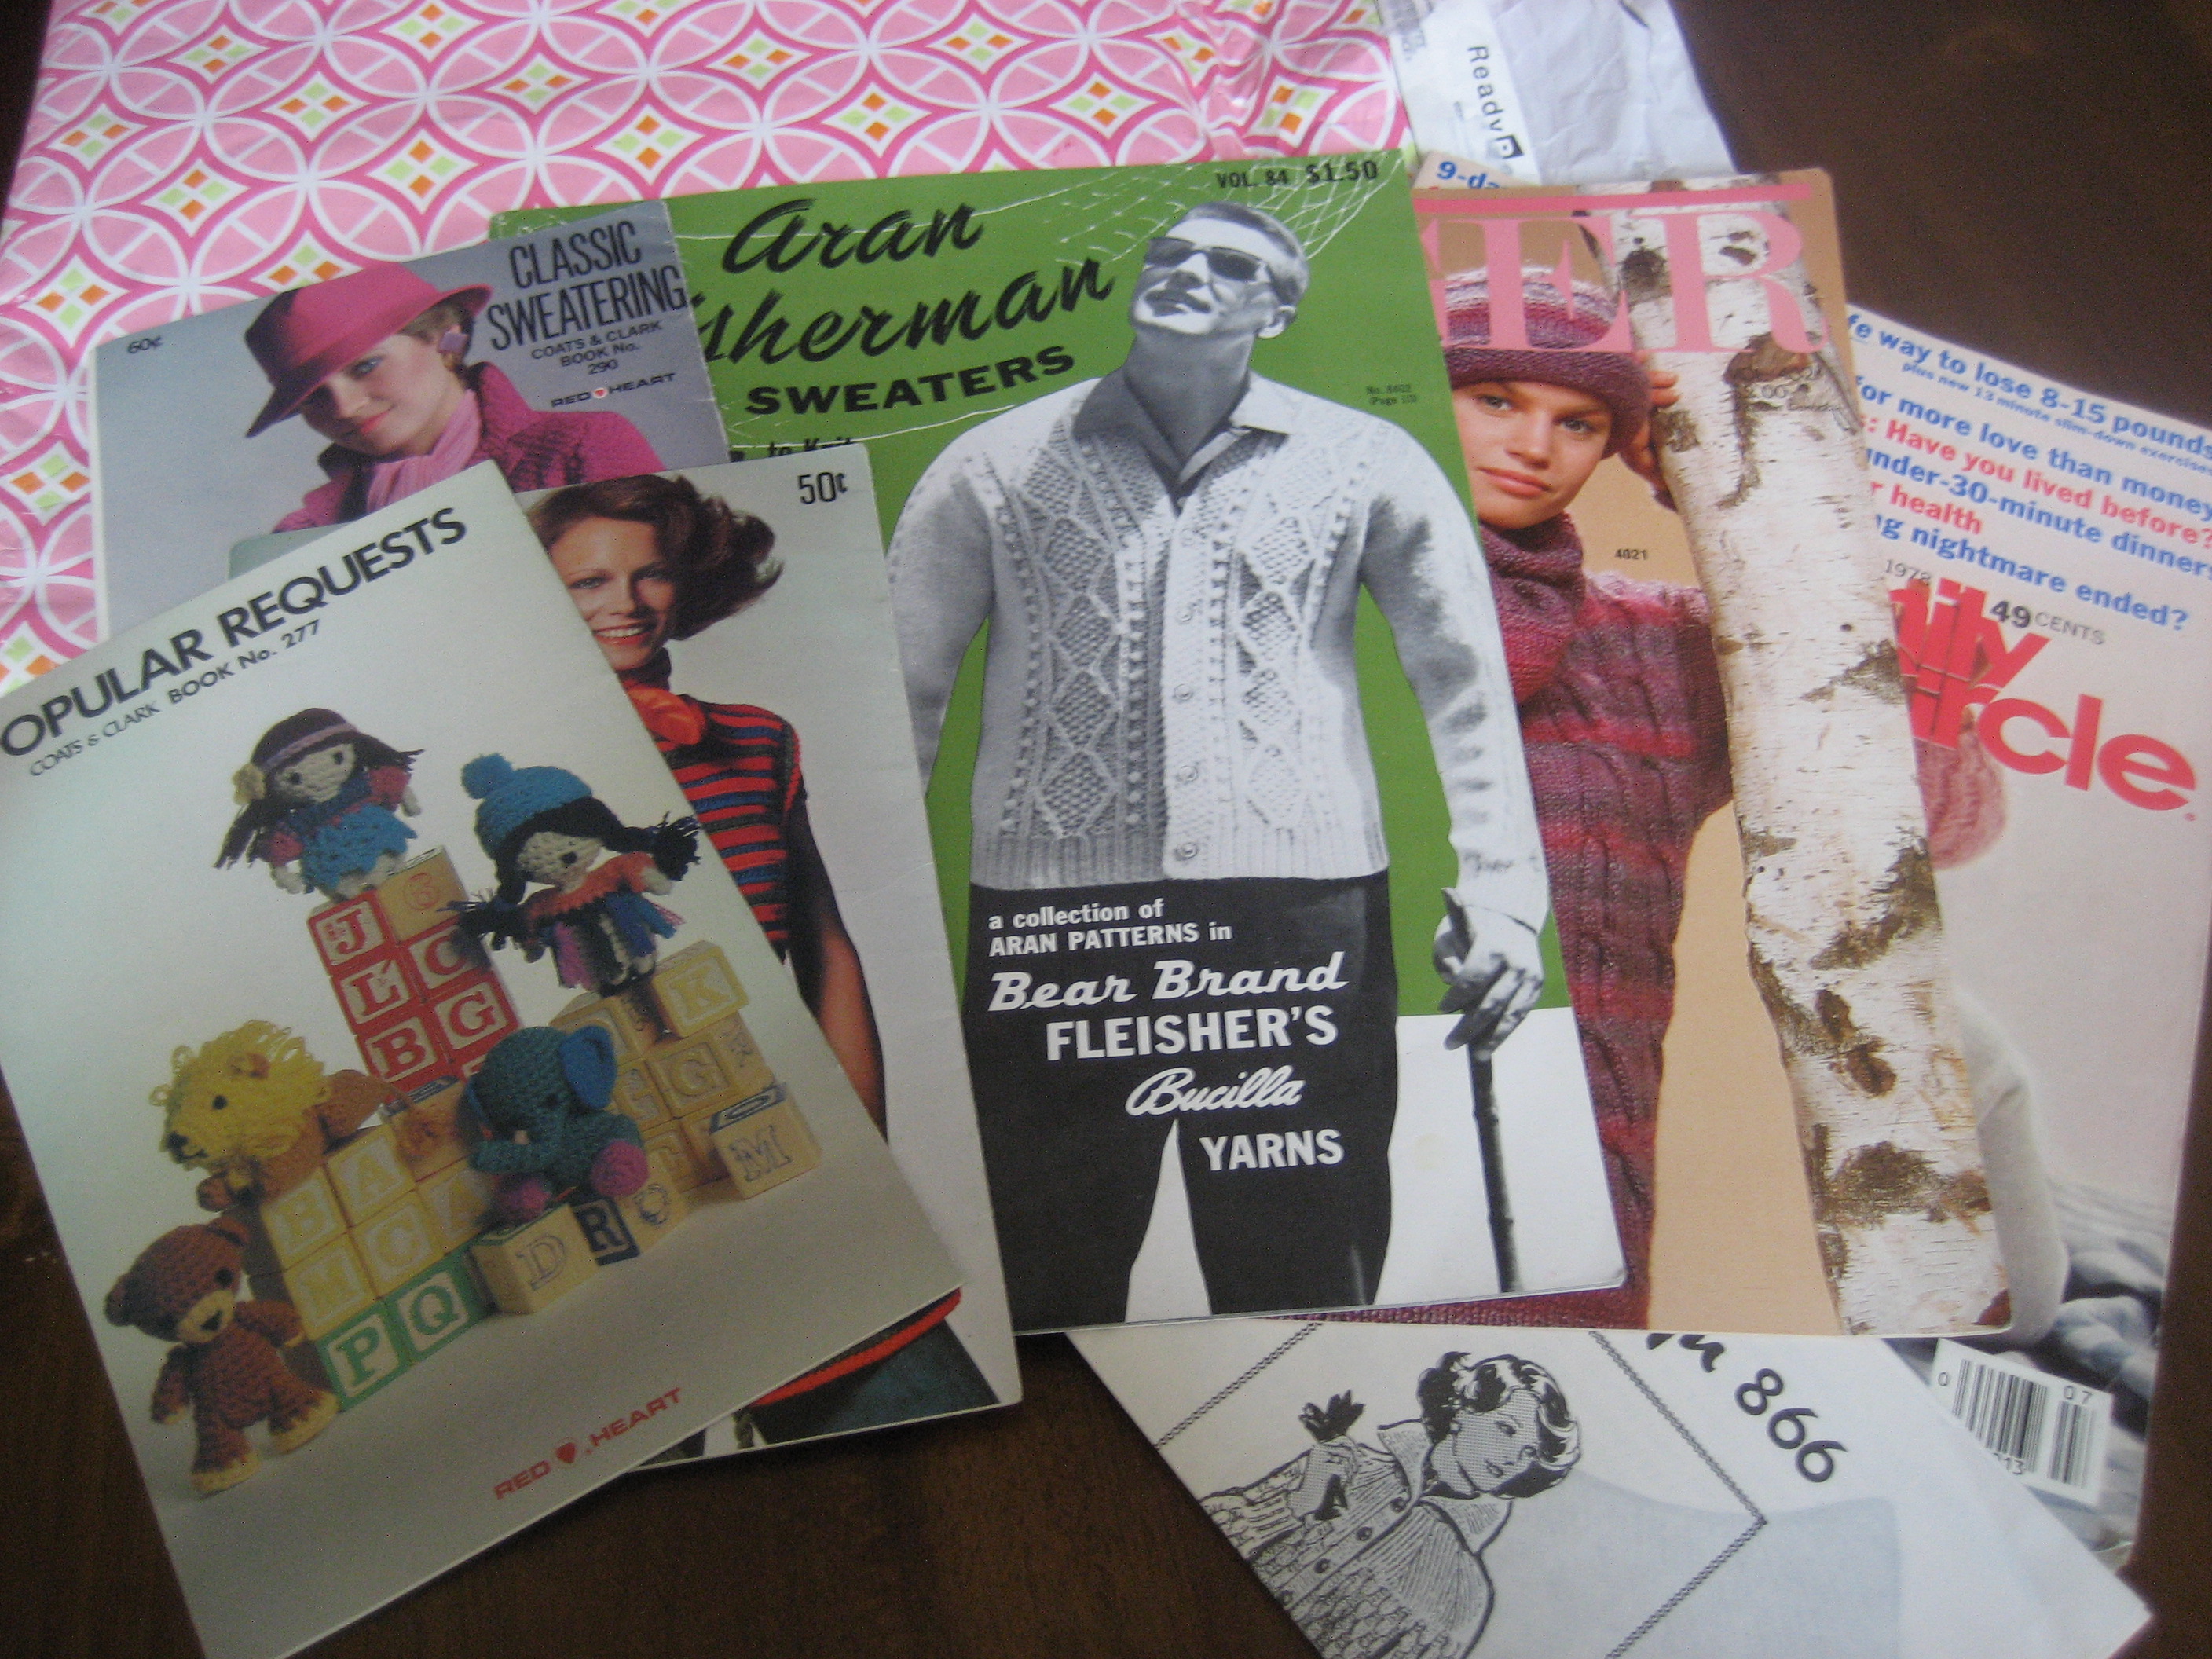 Vintage Las knitting patterns available from The Vintage